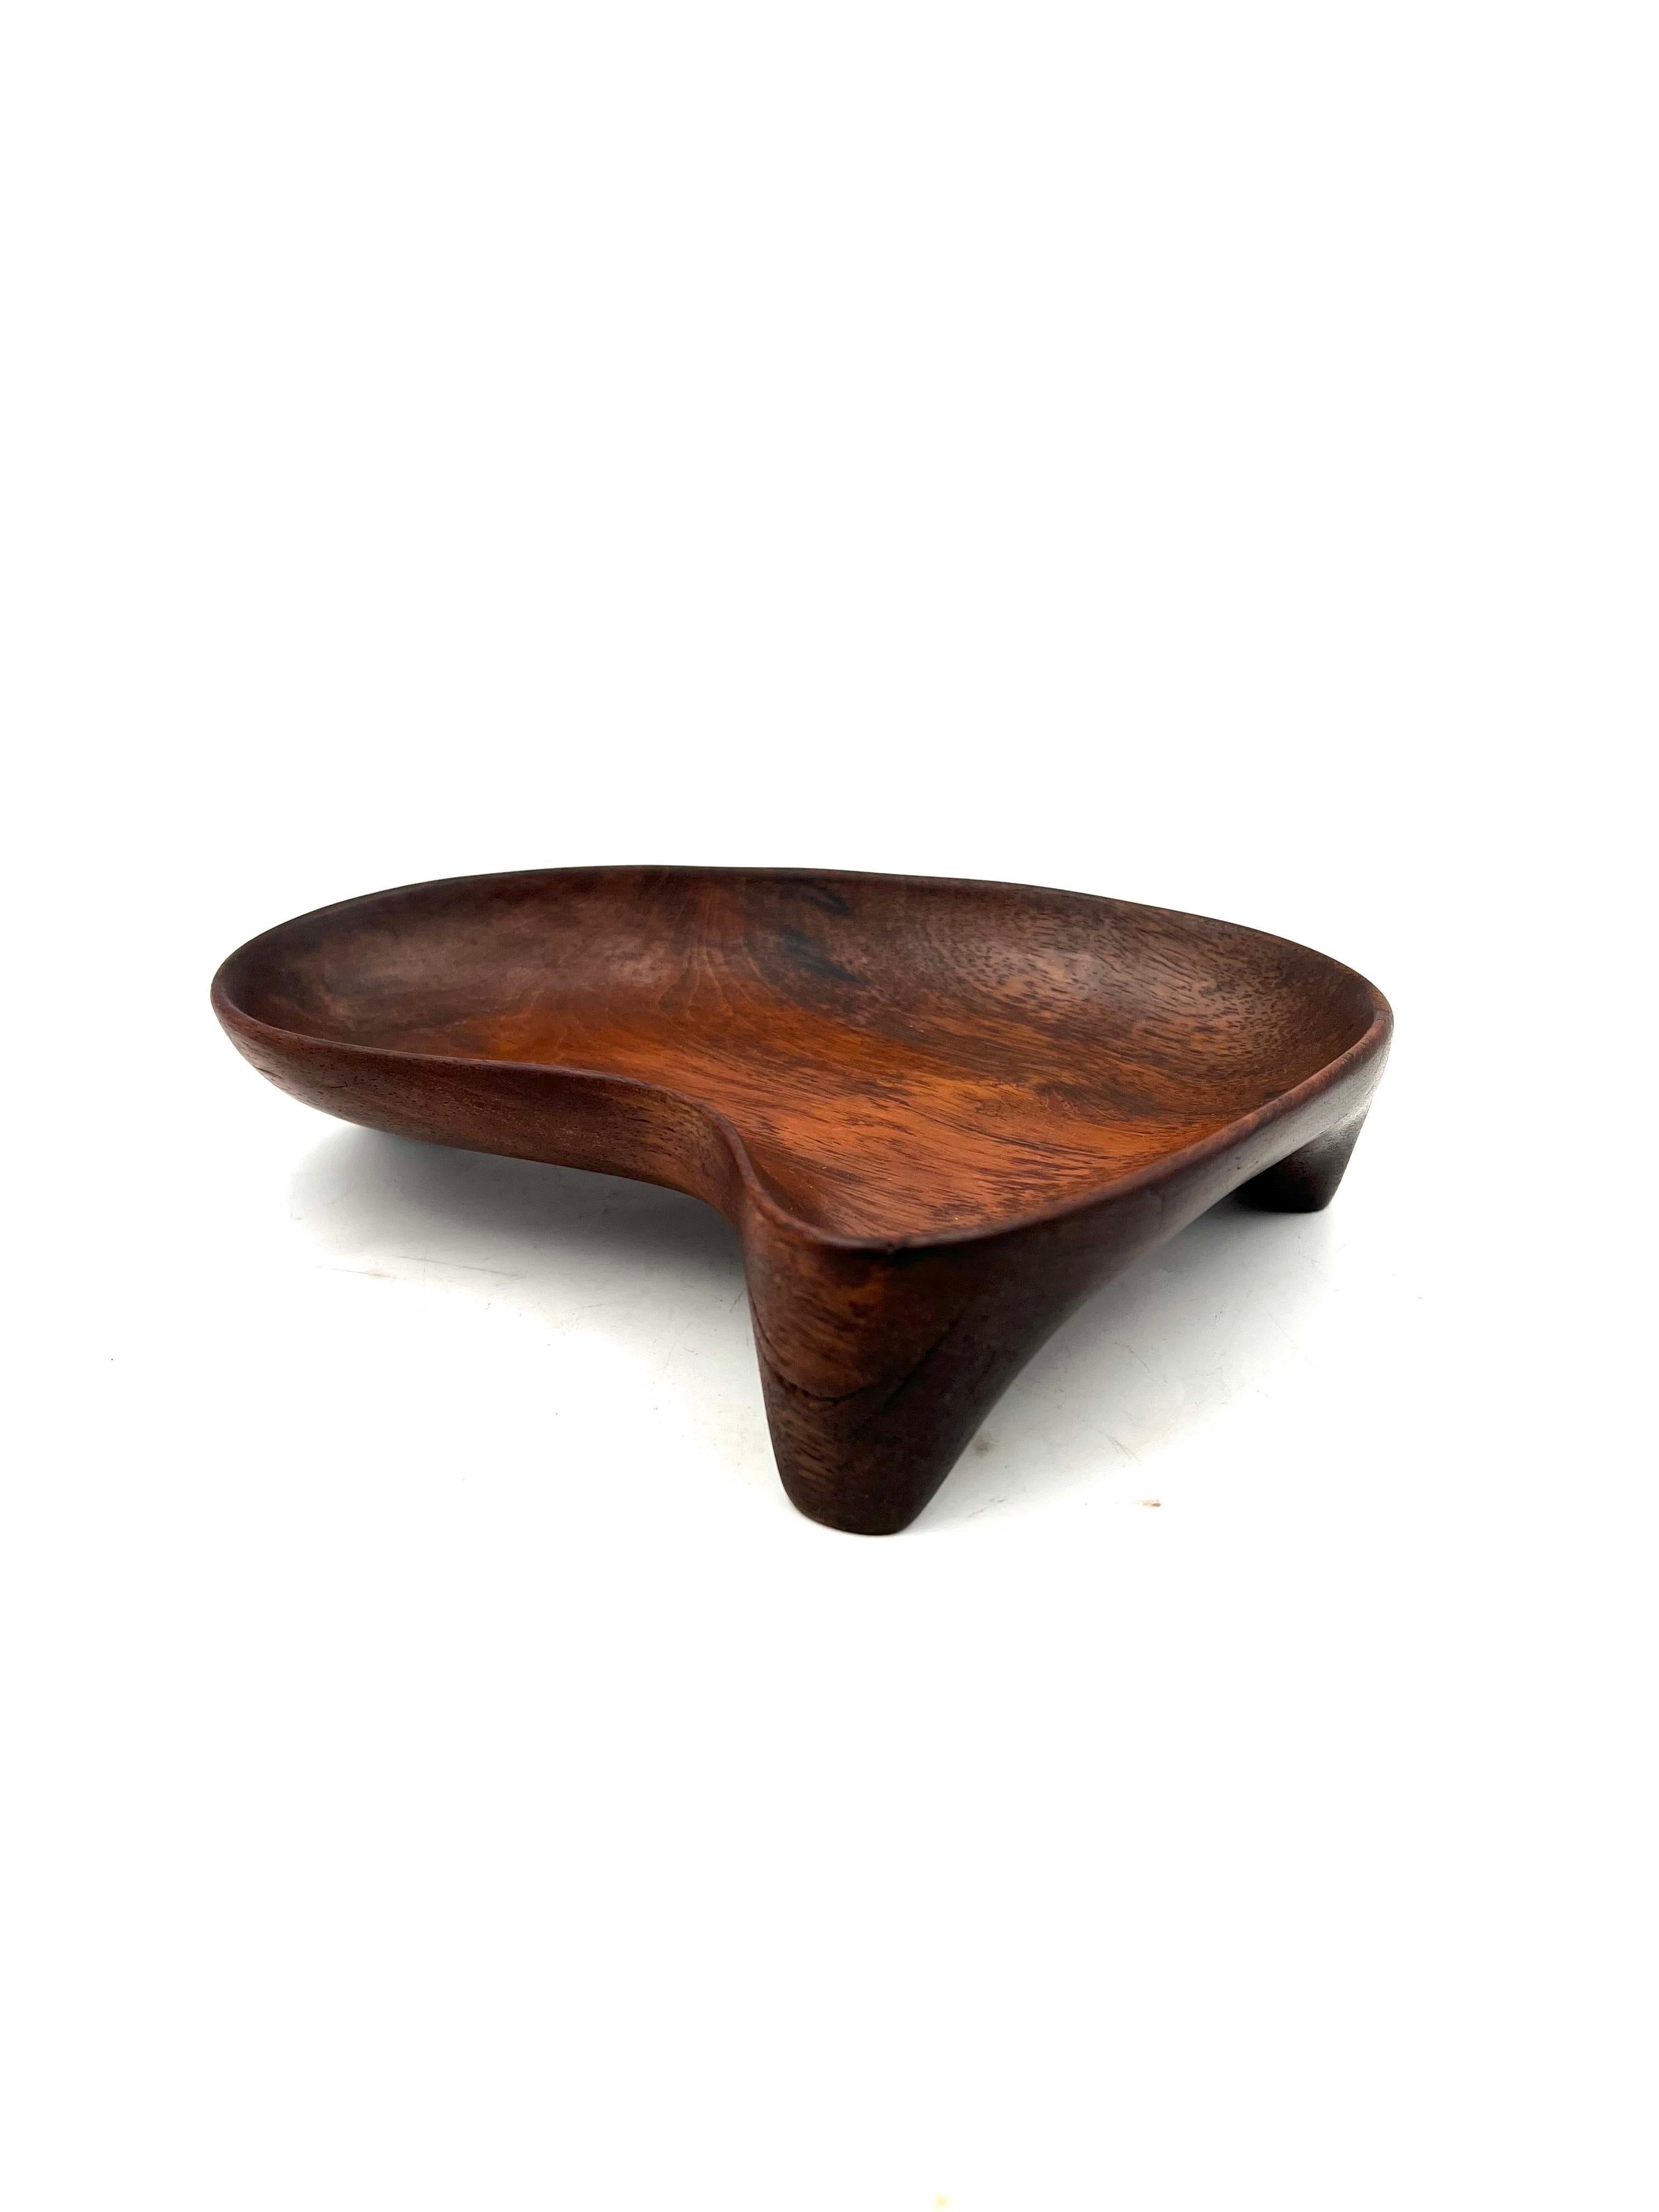 Mid-Century Modern Midcentury Freeform Rare Bowl by Mexican Modernist Don Shoemaker 1960s